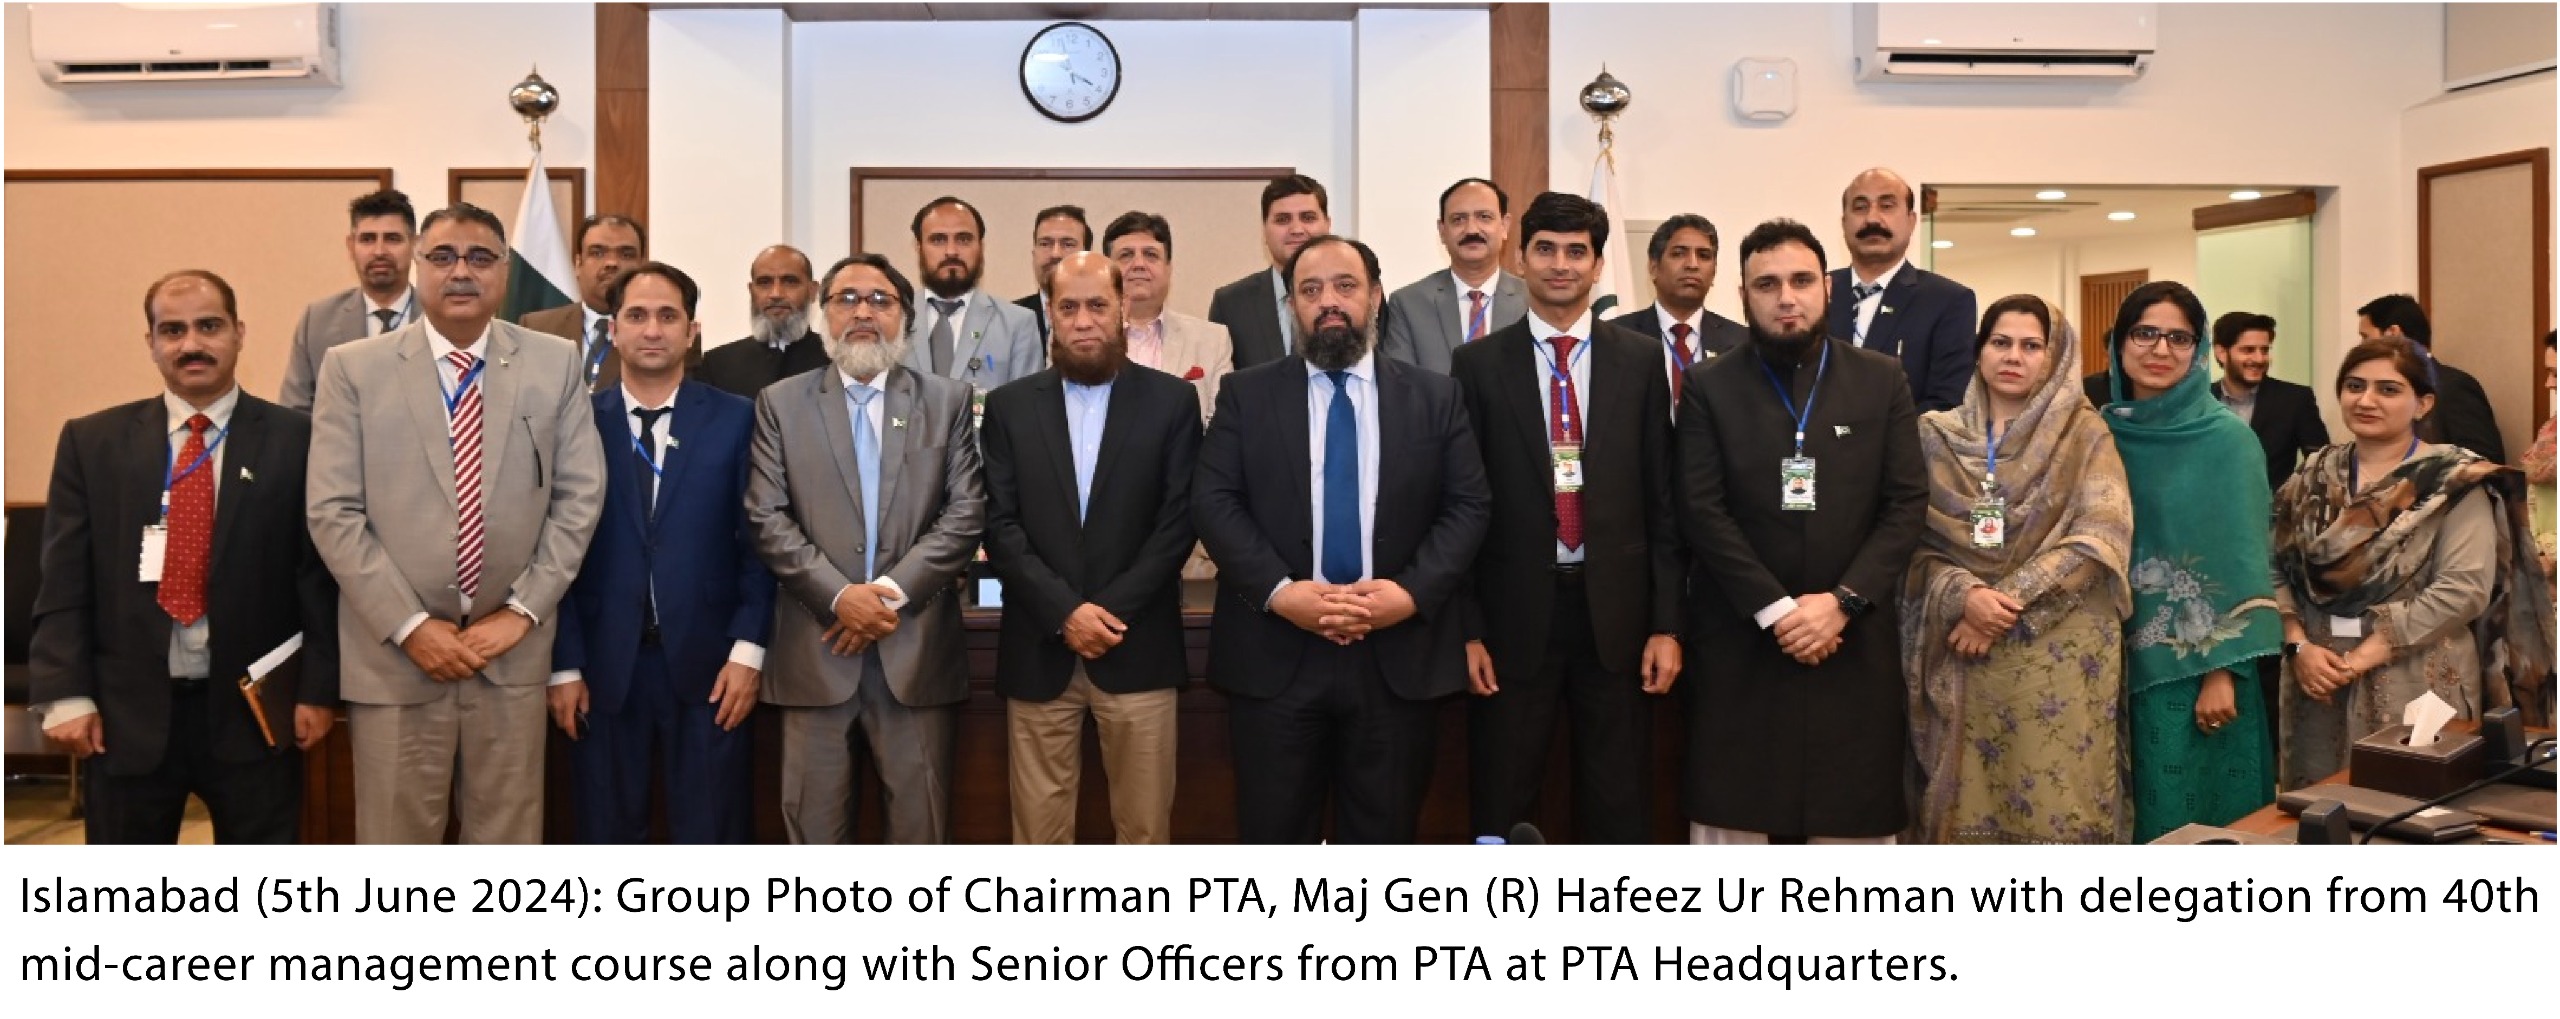 DELEGATION FROM 40th MID-CAREER MANAGEMENT COURSE VISITS PTA